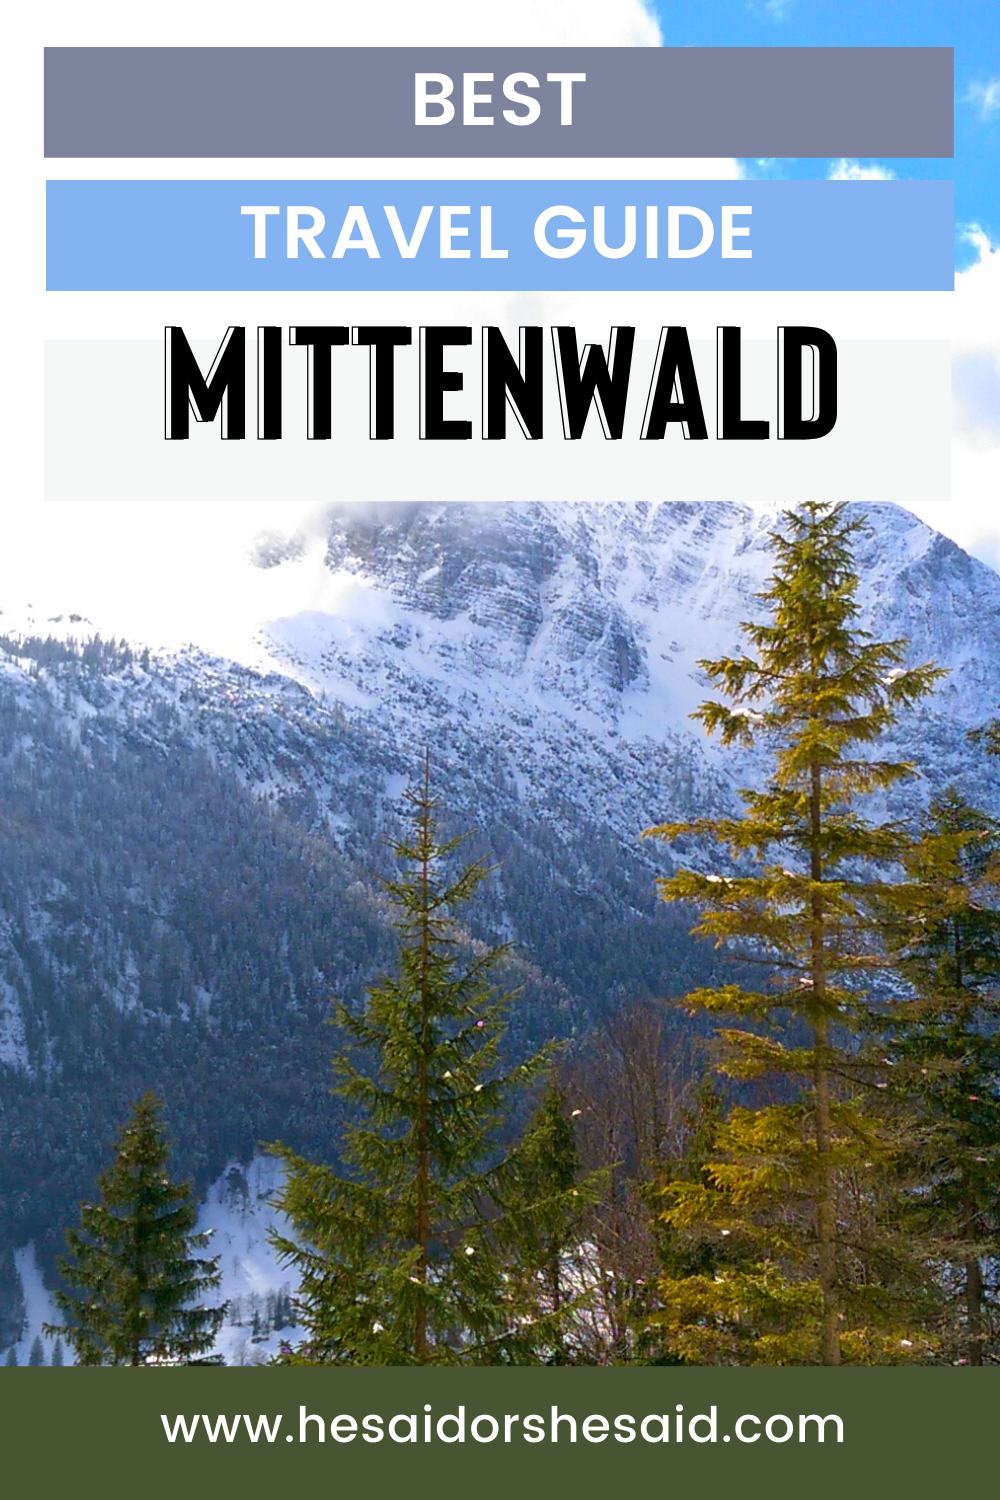 Best travel guide for Mittenwald by hesaidorshesaid